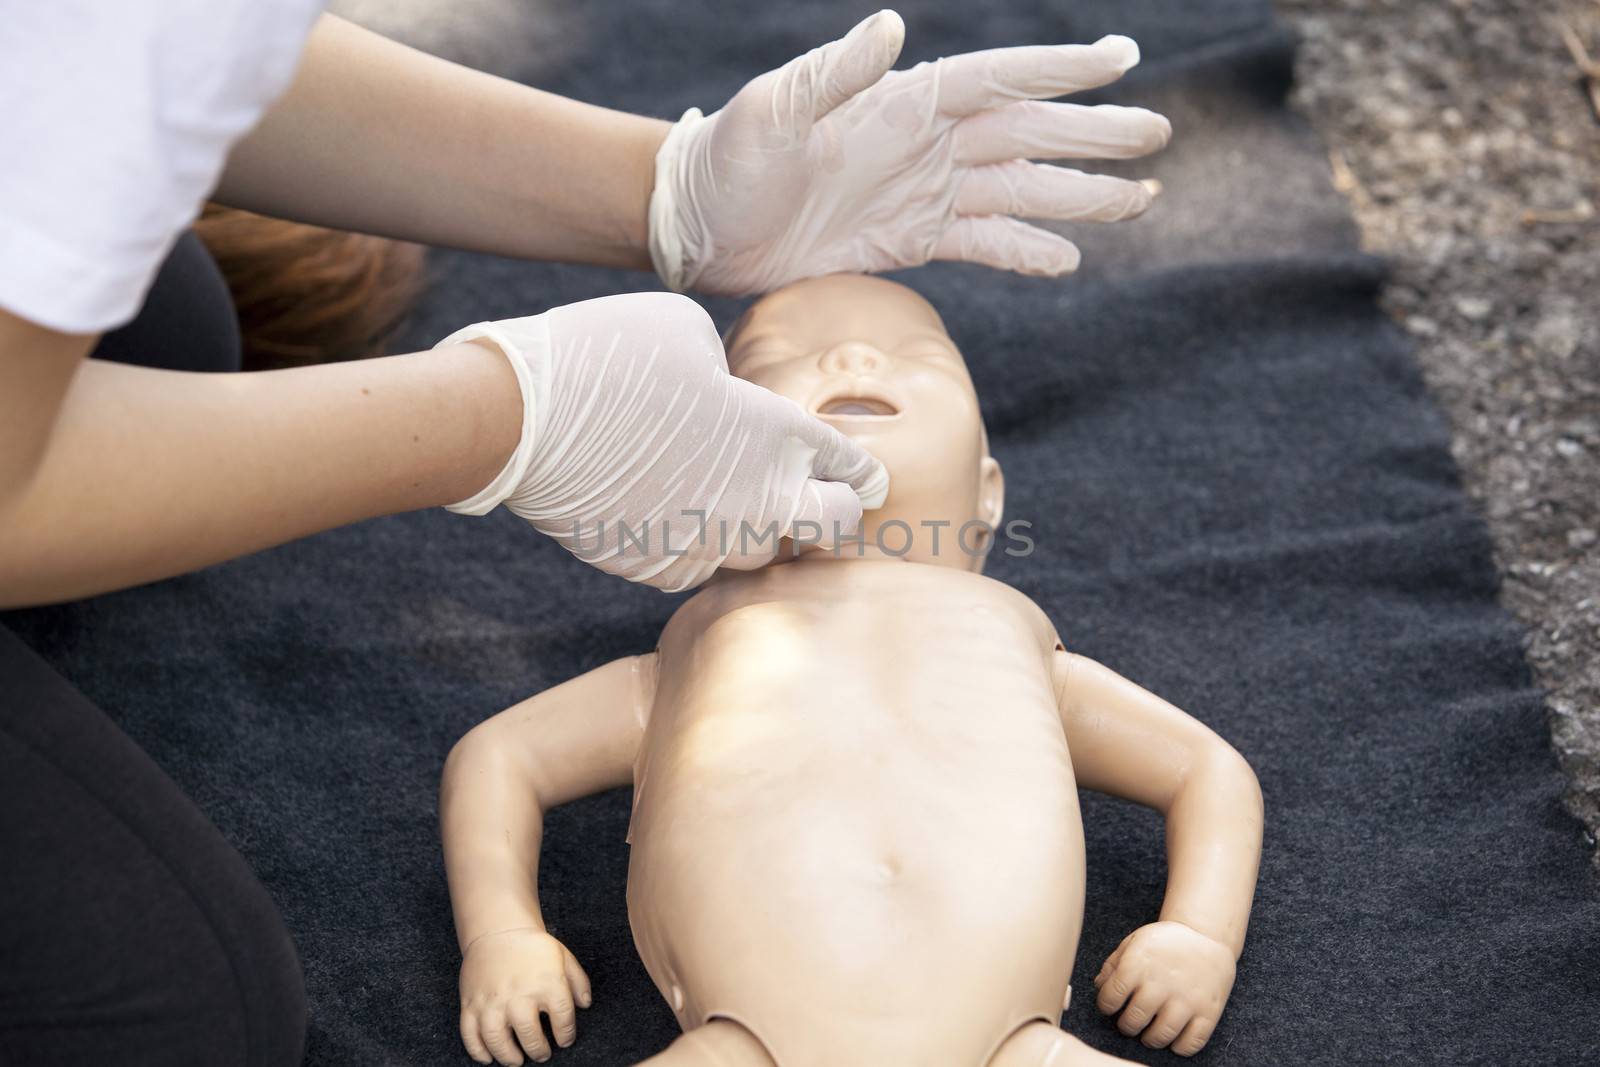 Infant dummy first aid by wellphoto